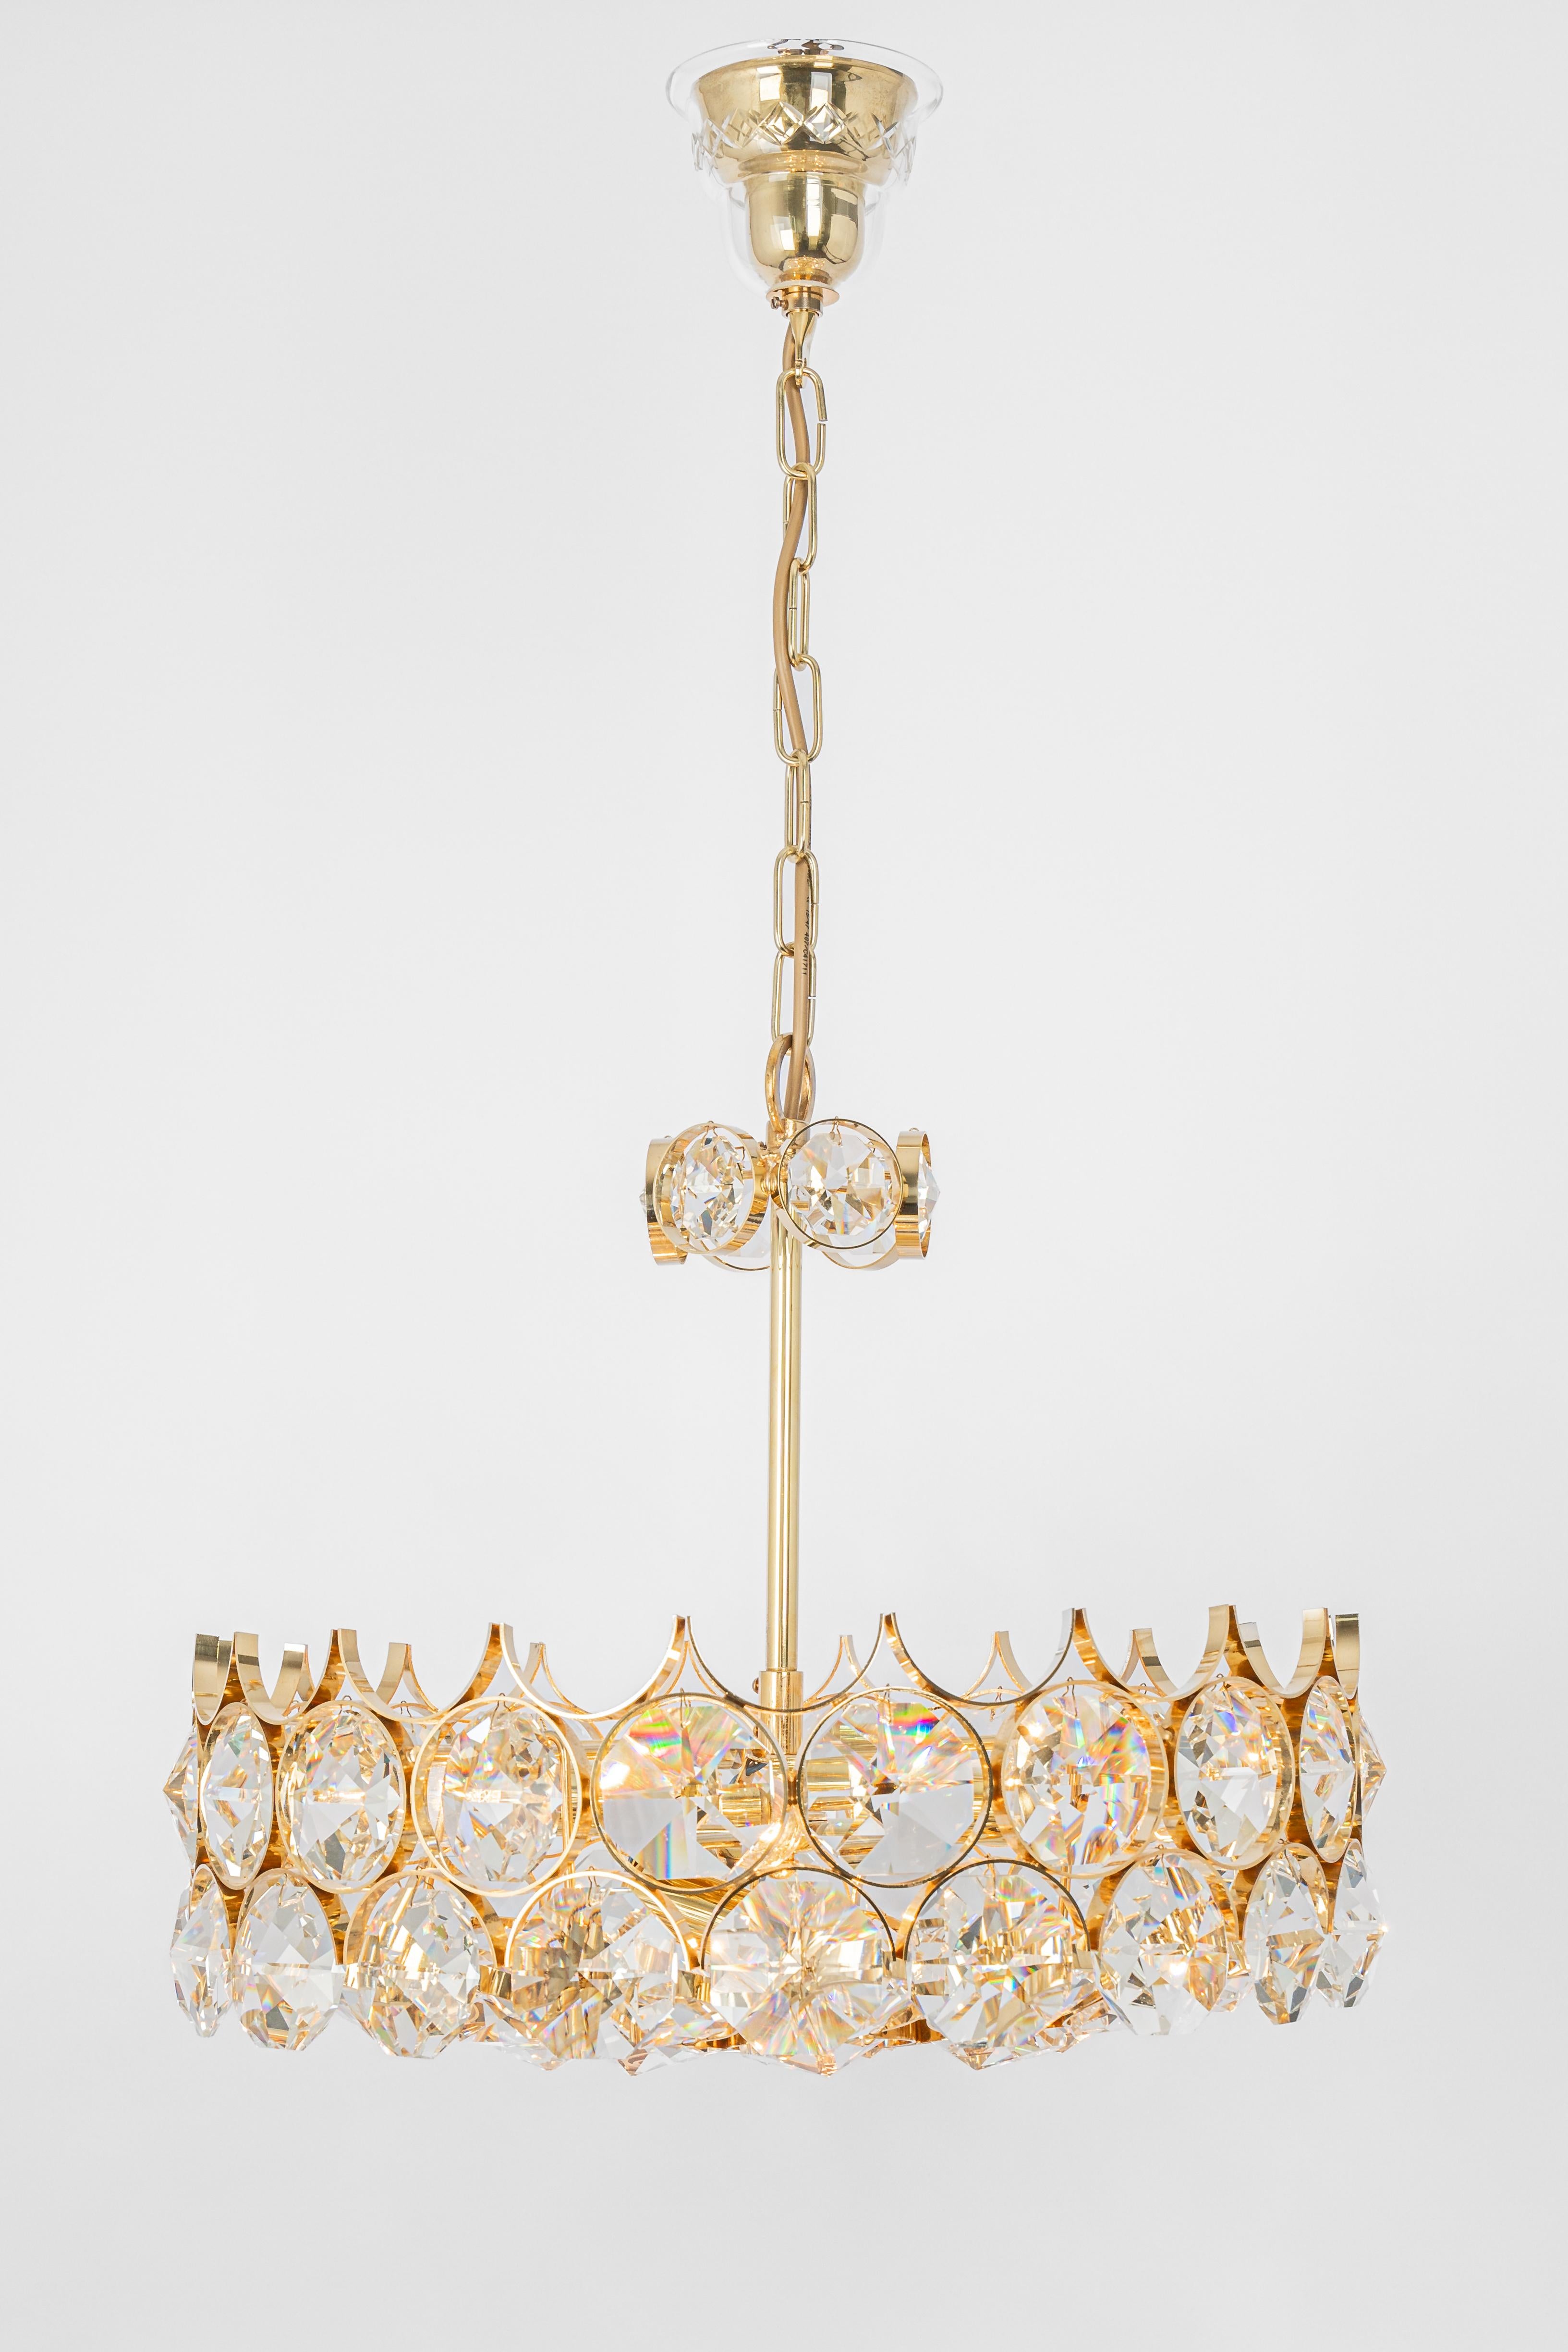 1 of 4 Large Gilt Brass Chandelier, Sciolari Design by Palwa, Germany, 1970s For Sale 3